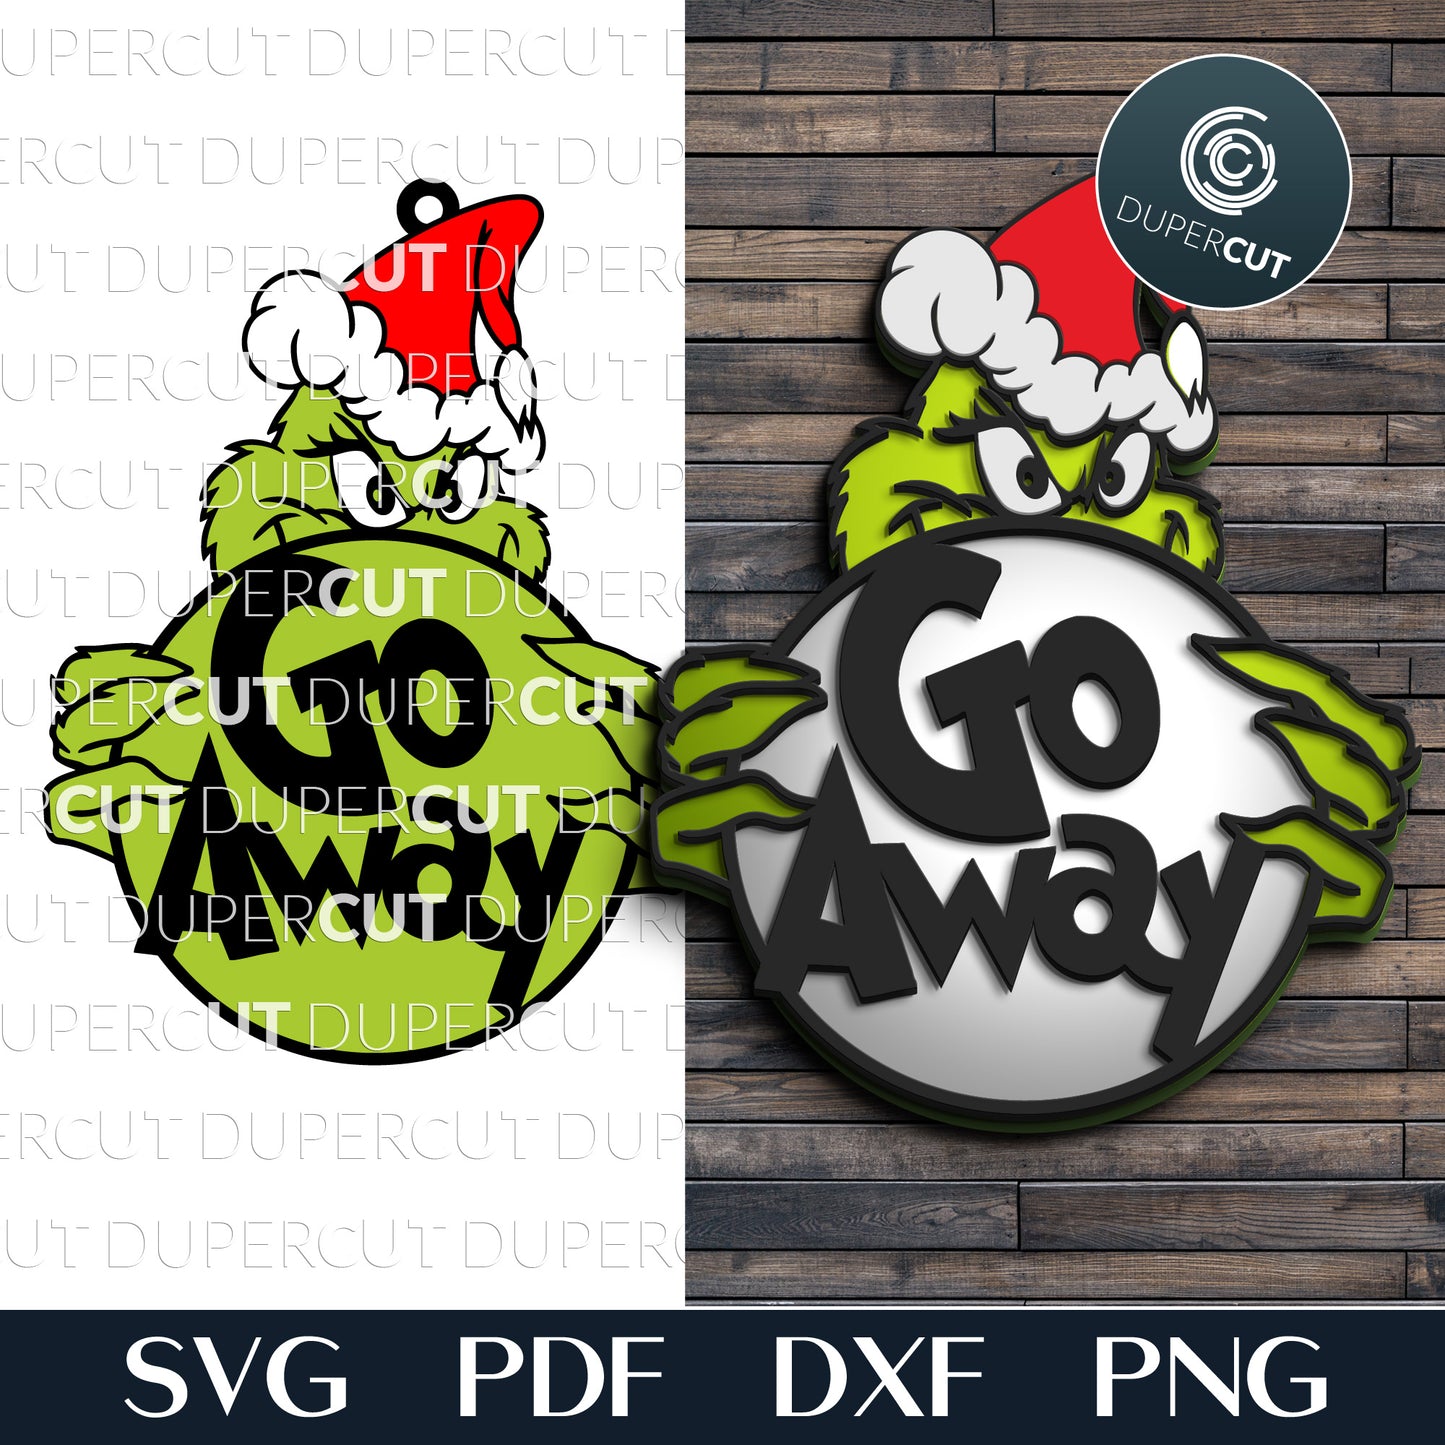 Grinch door hanger funny sign - go away template - SVG DXF laser cutting vector files for Glowforge, Cricut, Silhouette cameo, CNC plasma machines by DuperCut